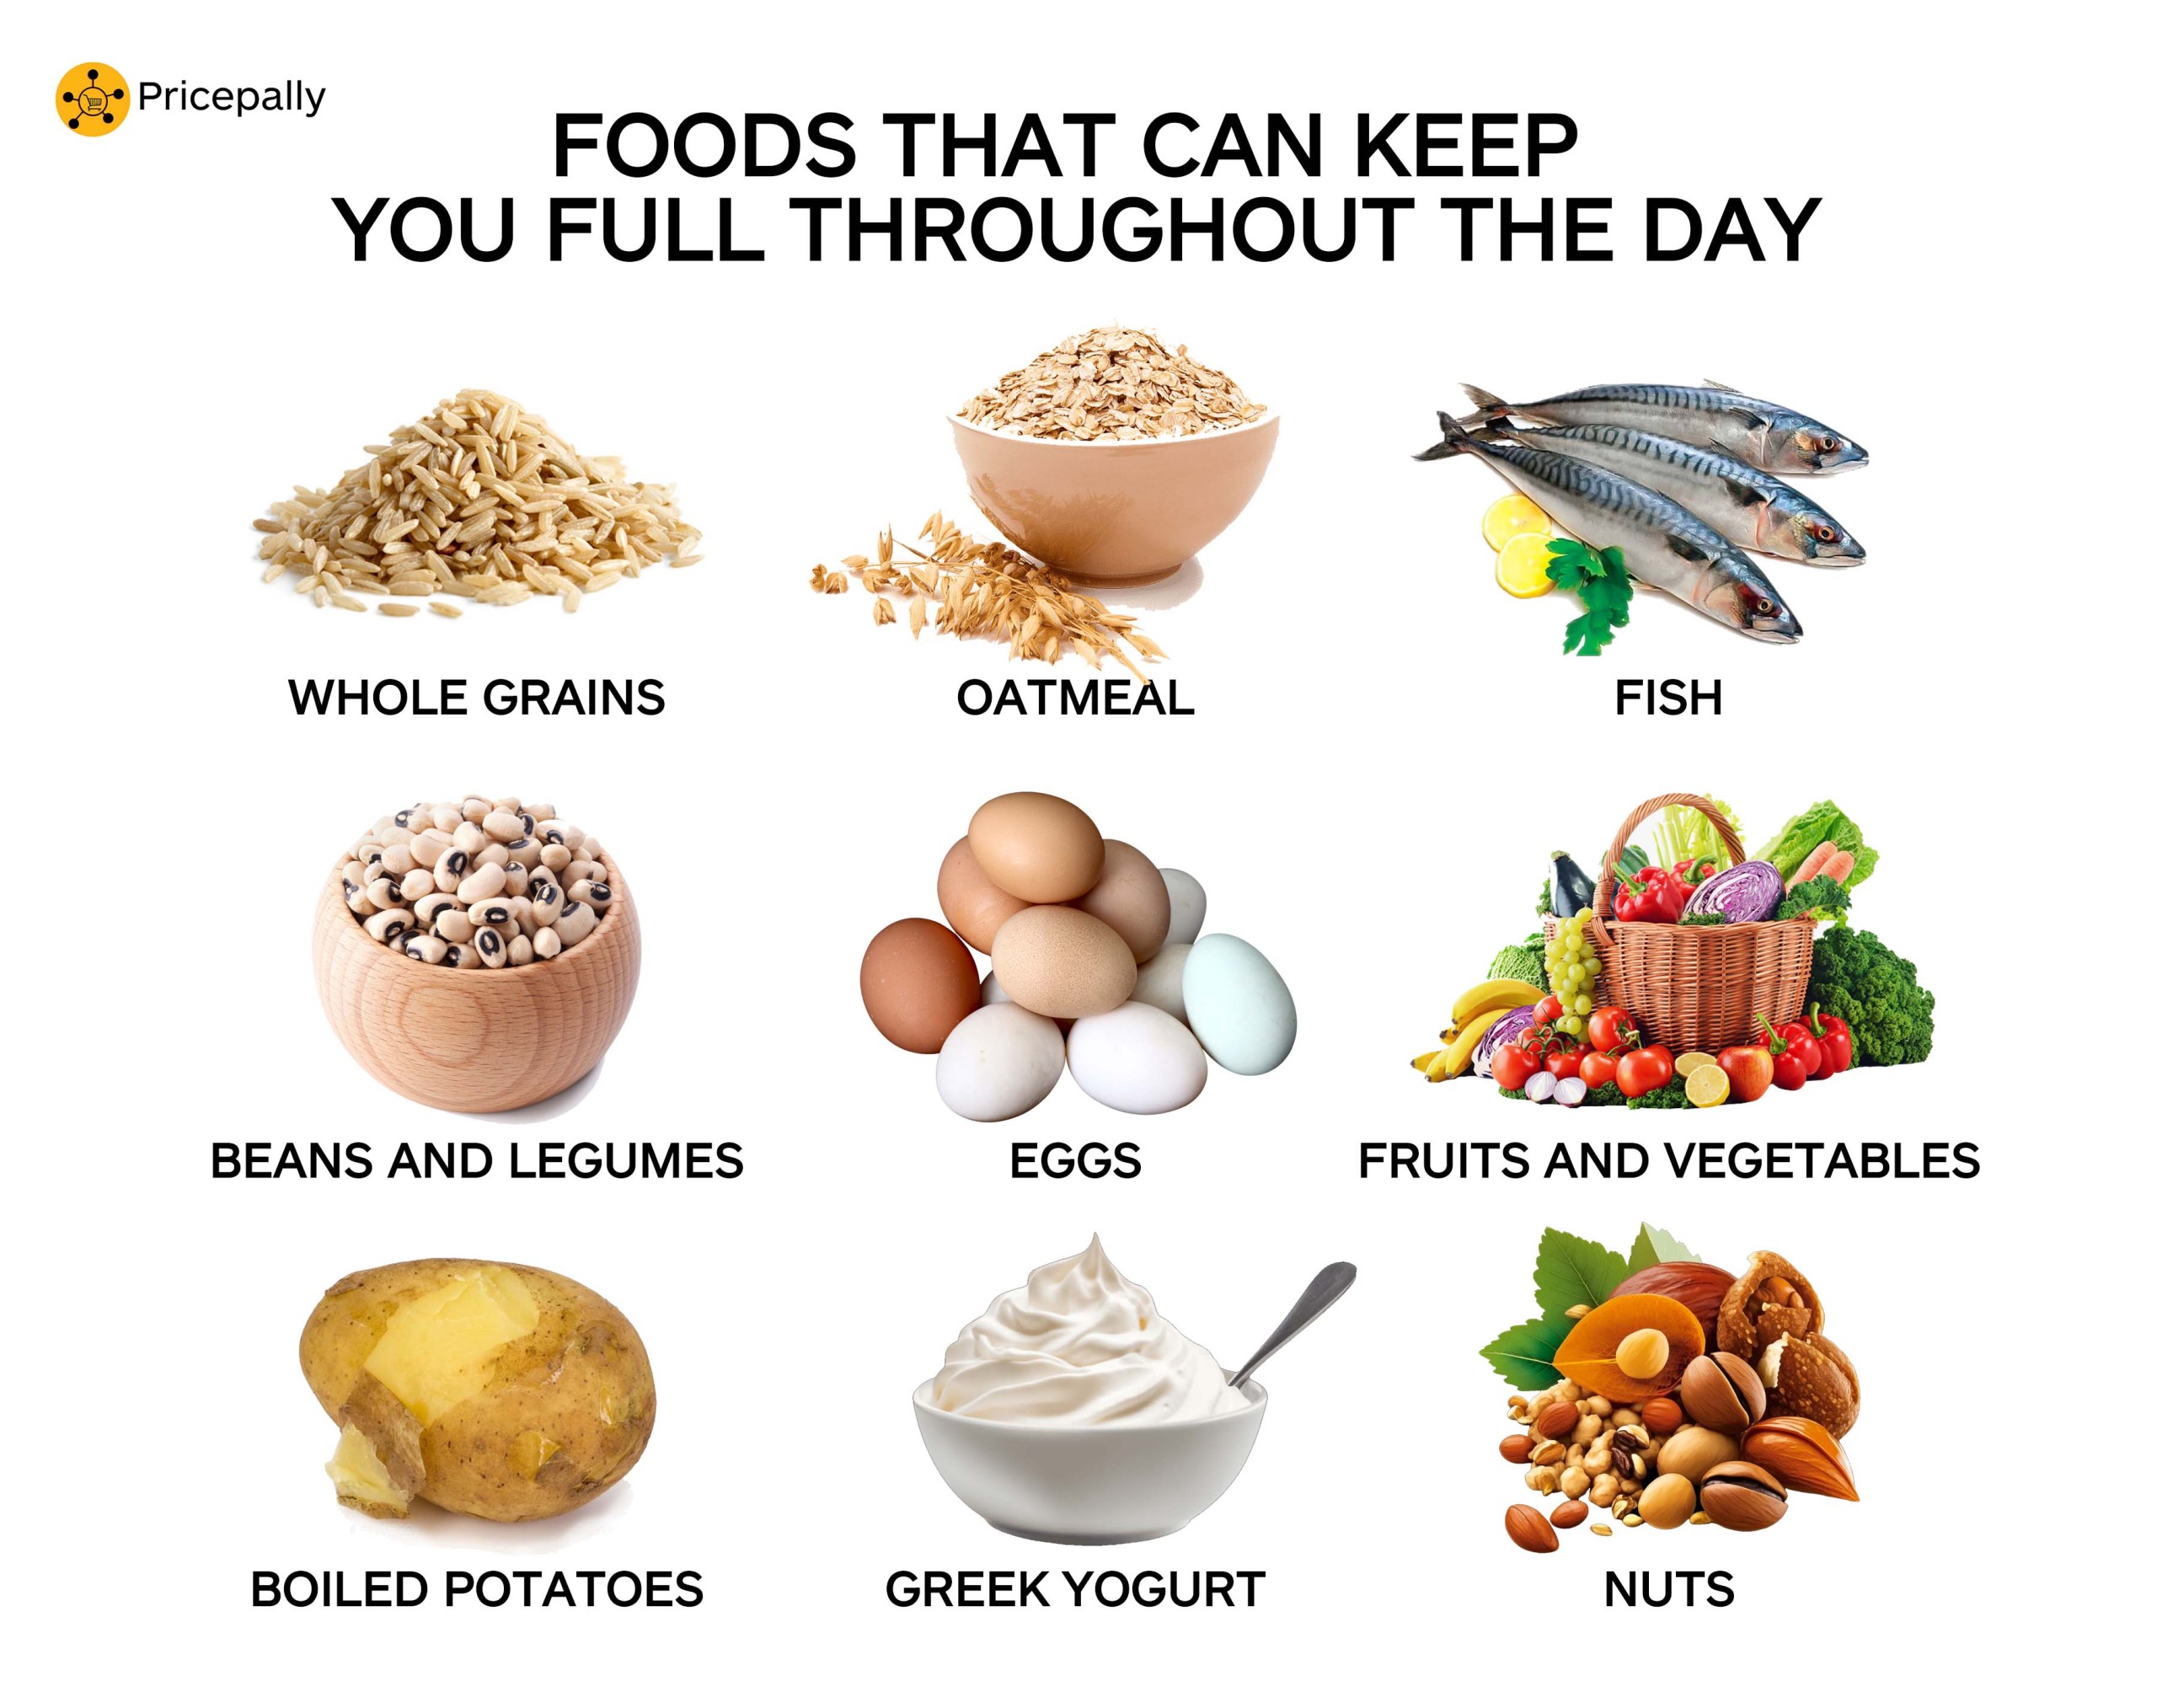 Examples of foods that keep you full throughout the day to build a healthy eating habit